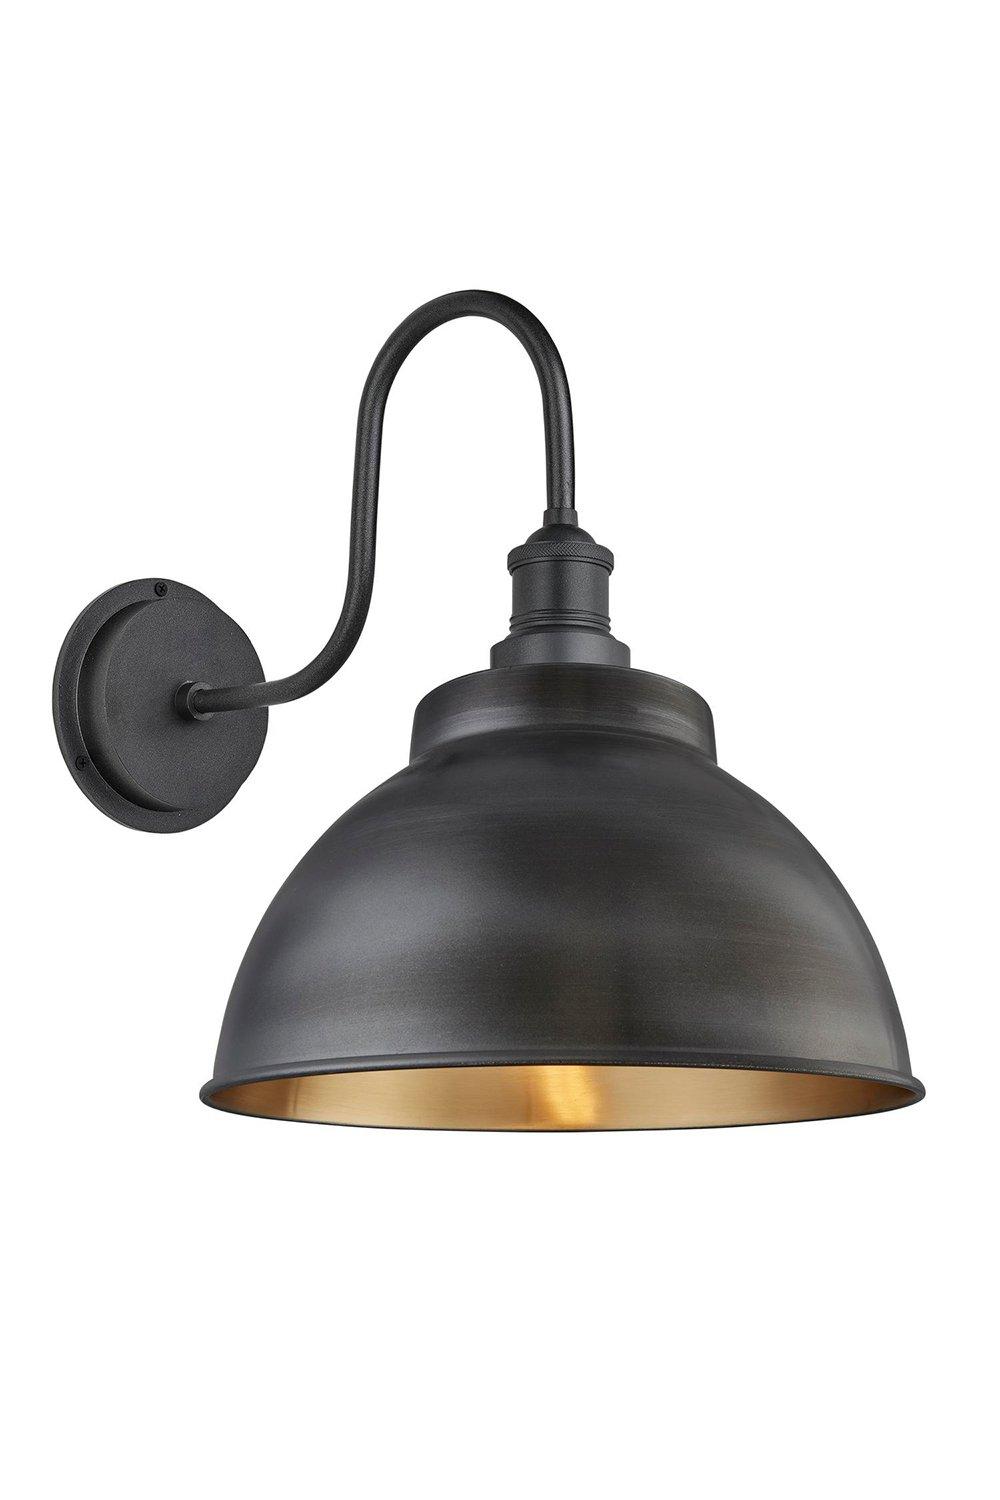 Swan Neck Outdoor & Bathroom Dome Wall Light, 13 Inch, Pewter & Brass, Pewter Holder, Globe Glass